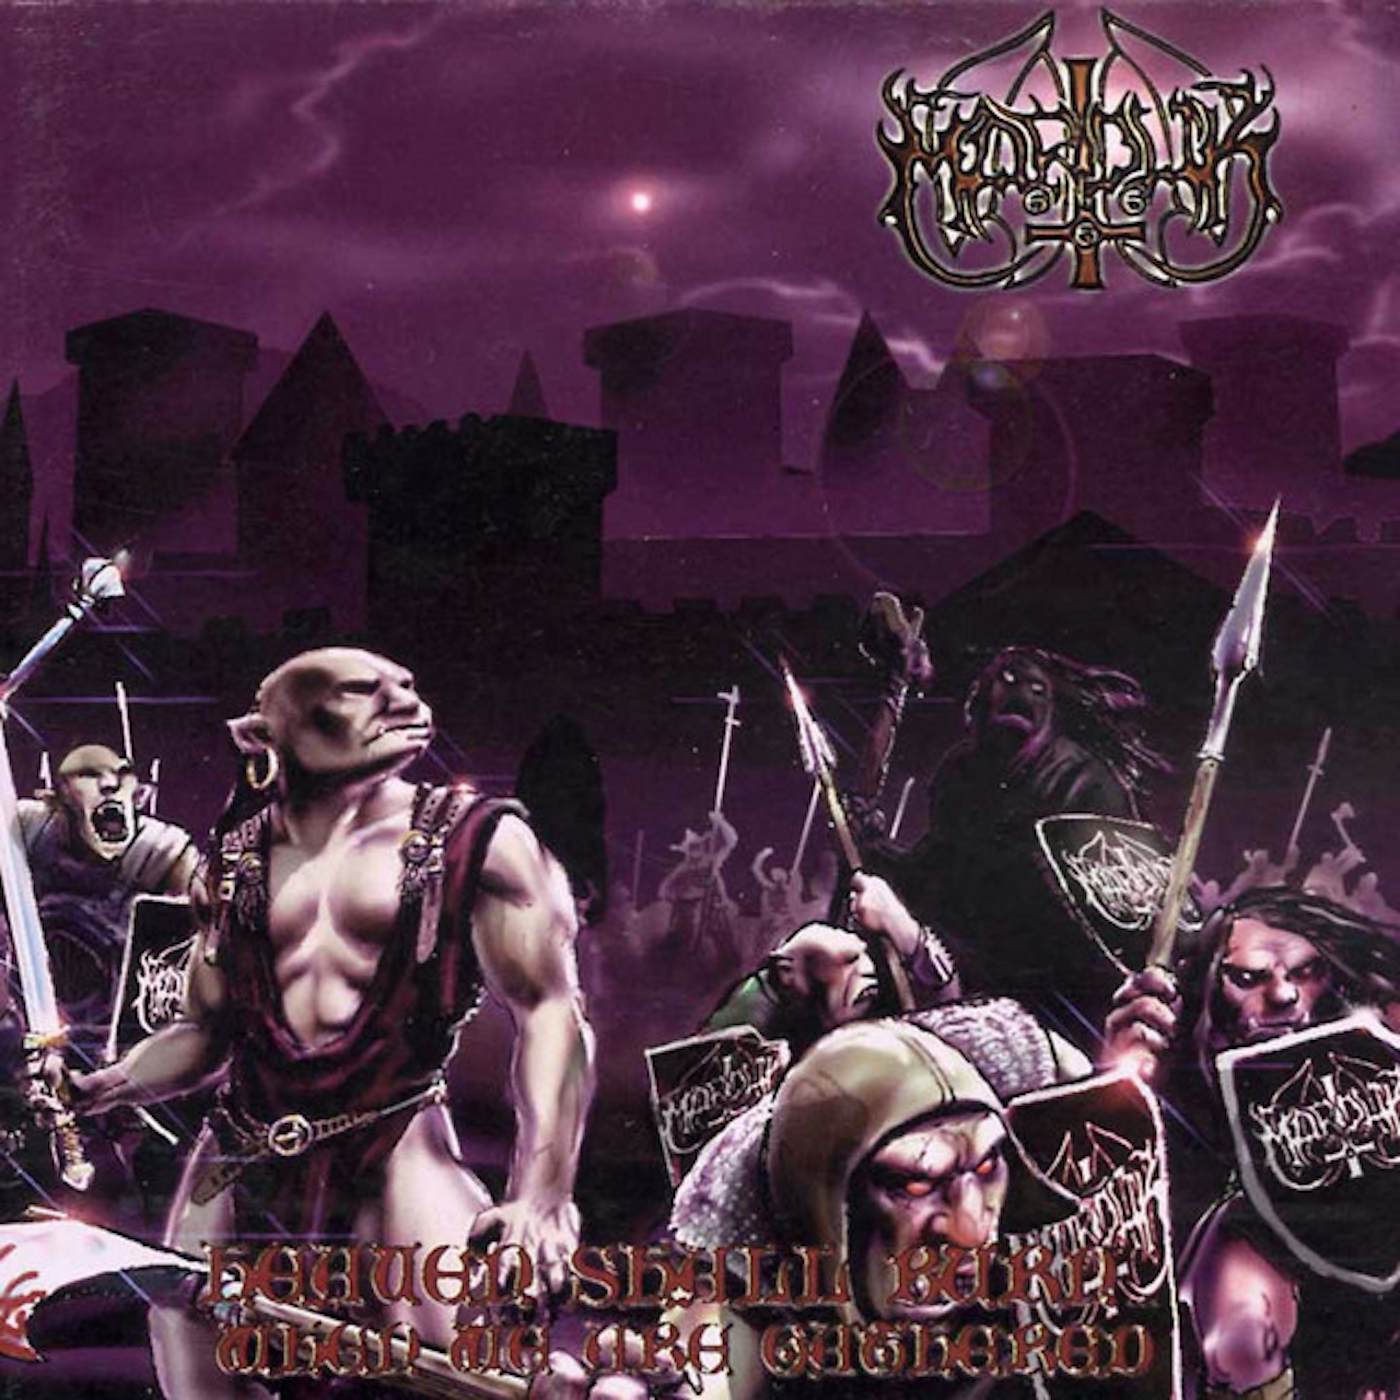 Marduk HEAVEN SHALL BURN WHEN WE ARE GATHERED CD